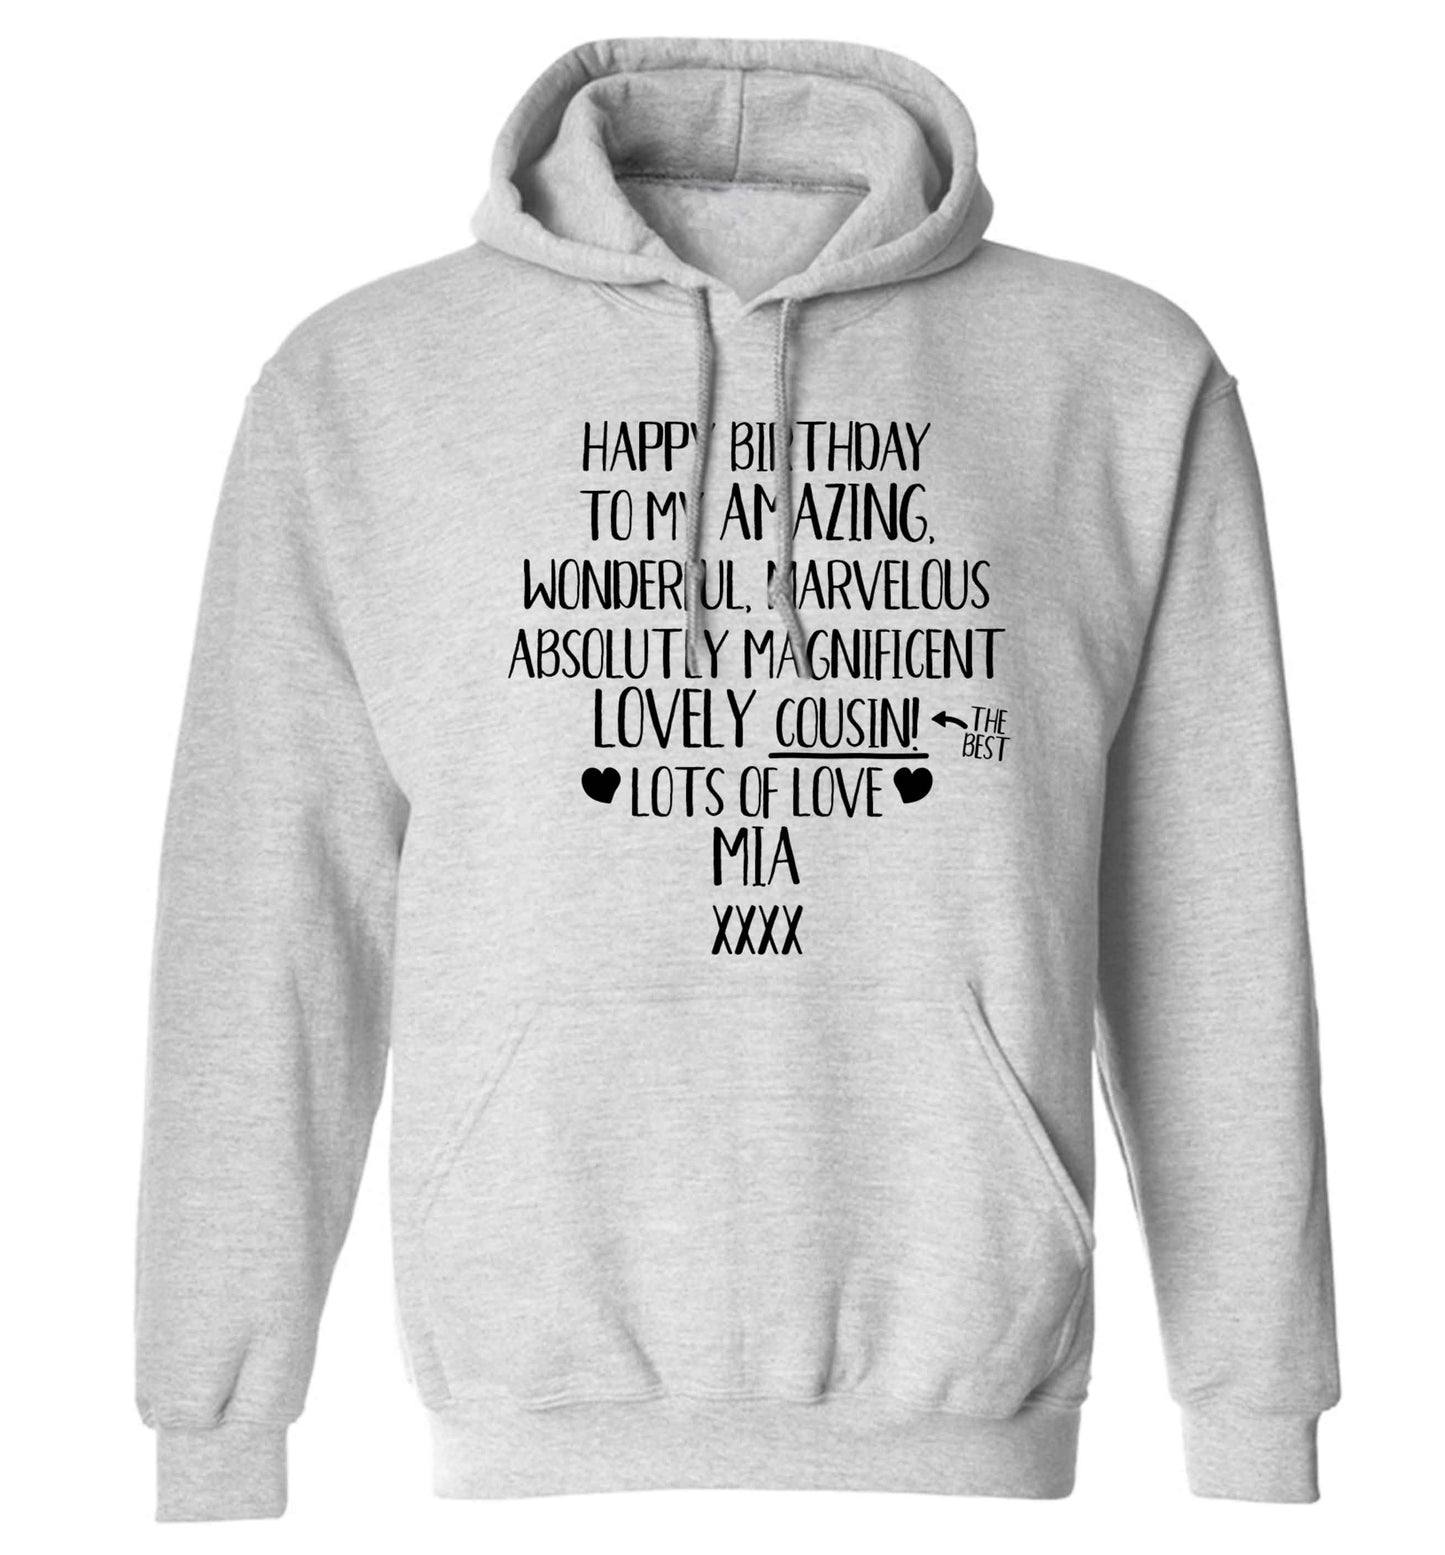 Personalised happy birthday to my amazing, wonderful, lovely cousin adults unisex grey hoodie 2XL